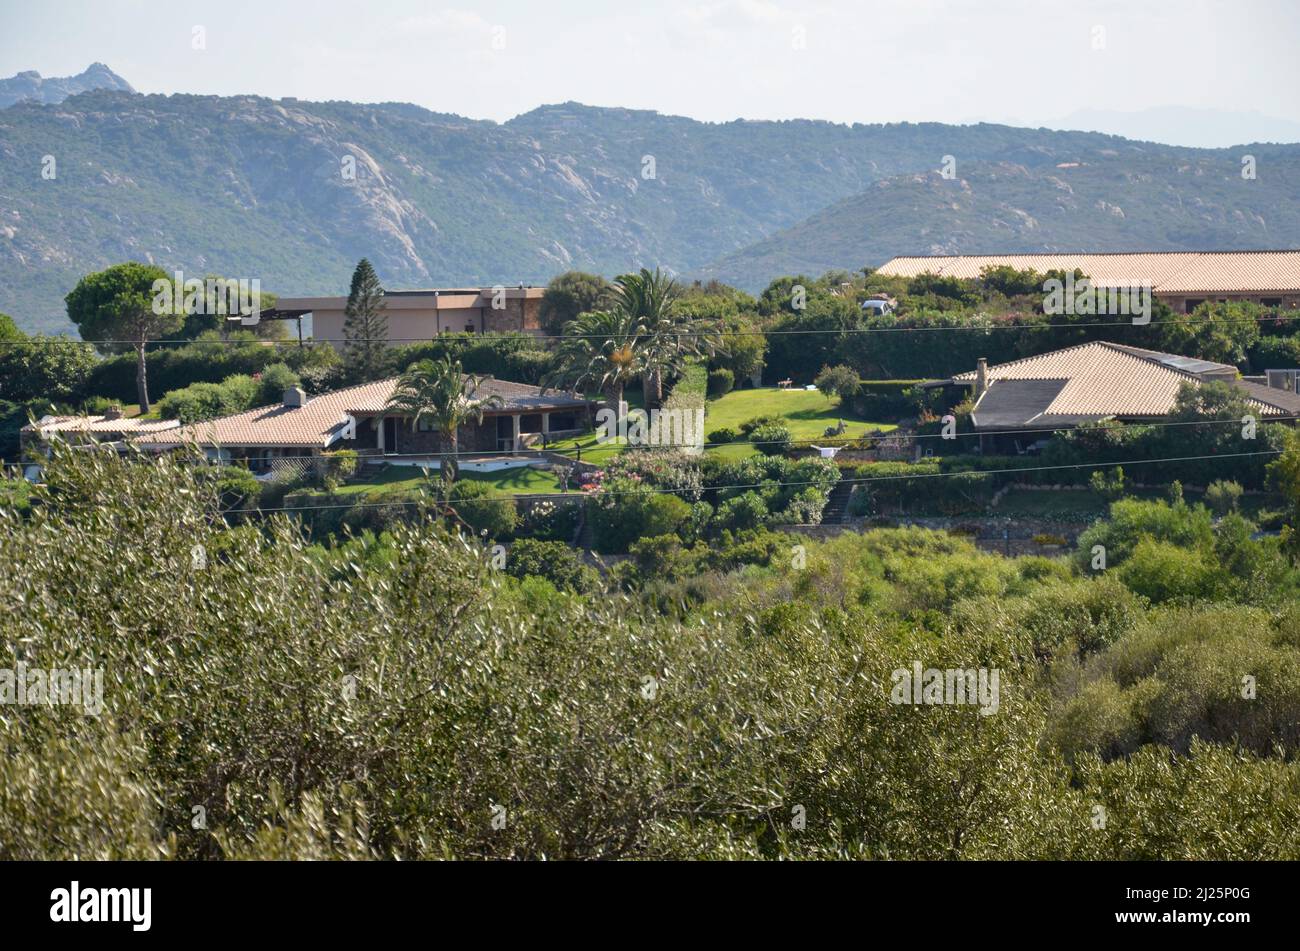 Some big villas with big orange tiled roofs and palm trees in the garden behind some bushes on the hills of the island of Sardinia Stock Photo